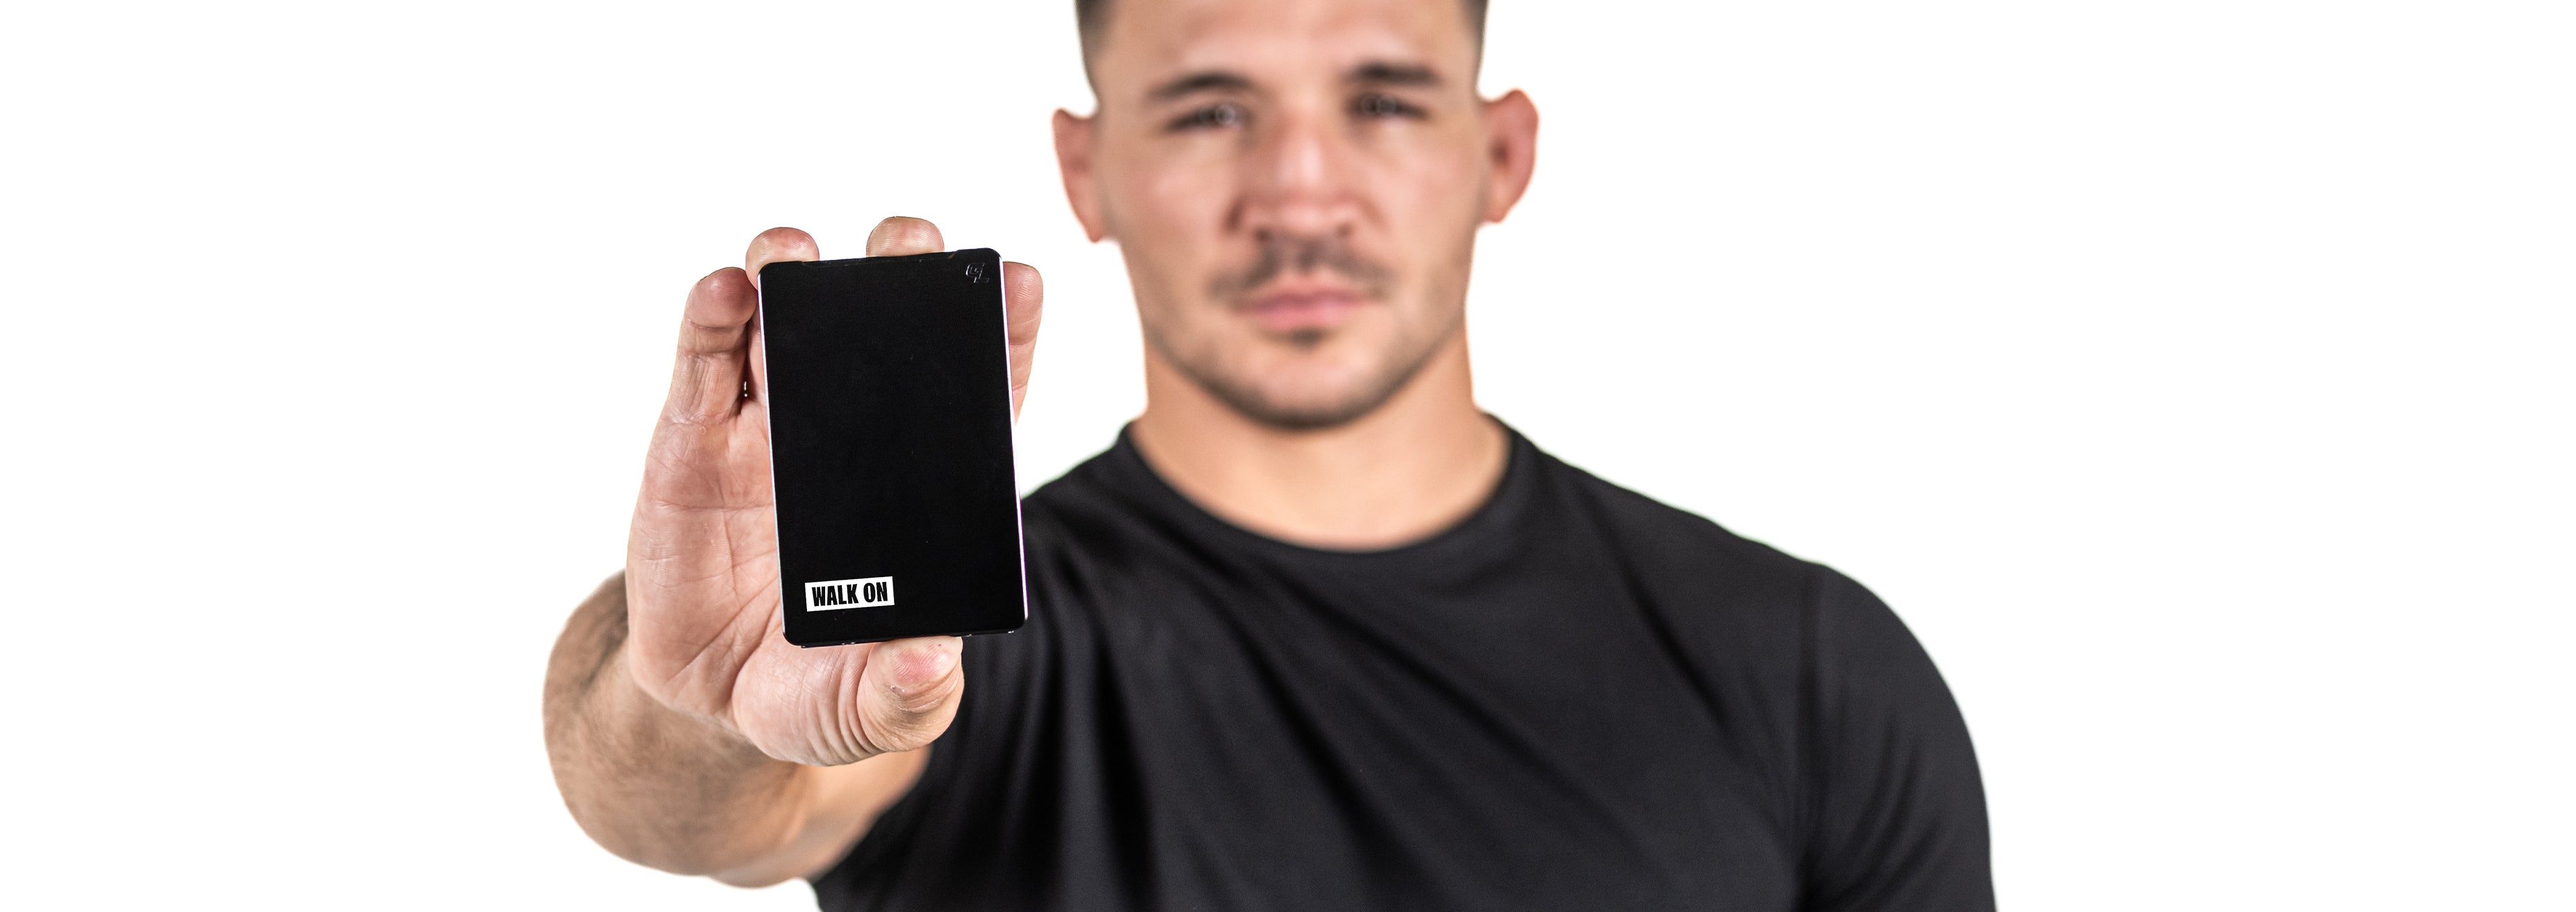 Groove Wallet® - Michael Chandler WALK ON lifestyle image 3